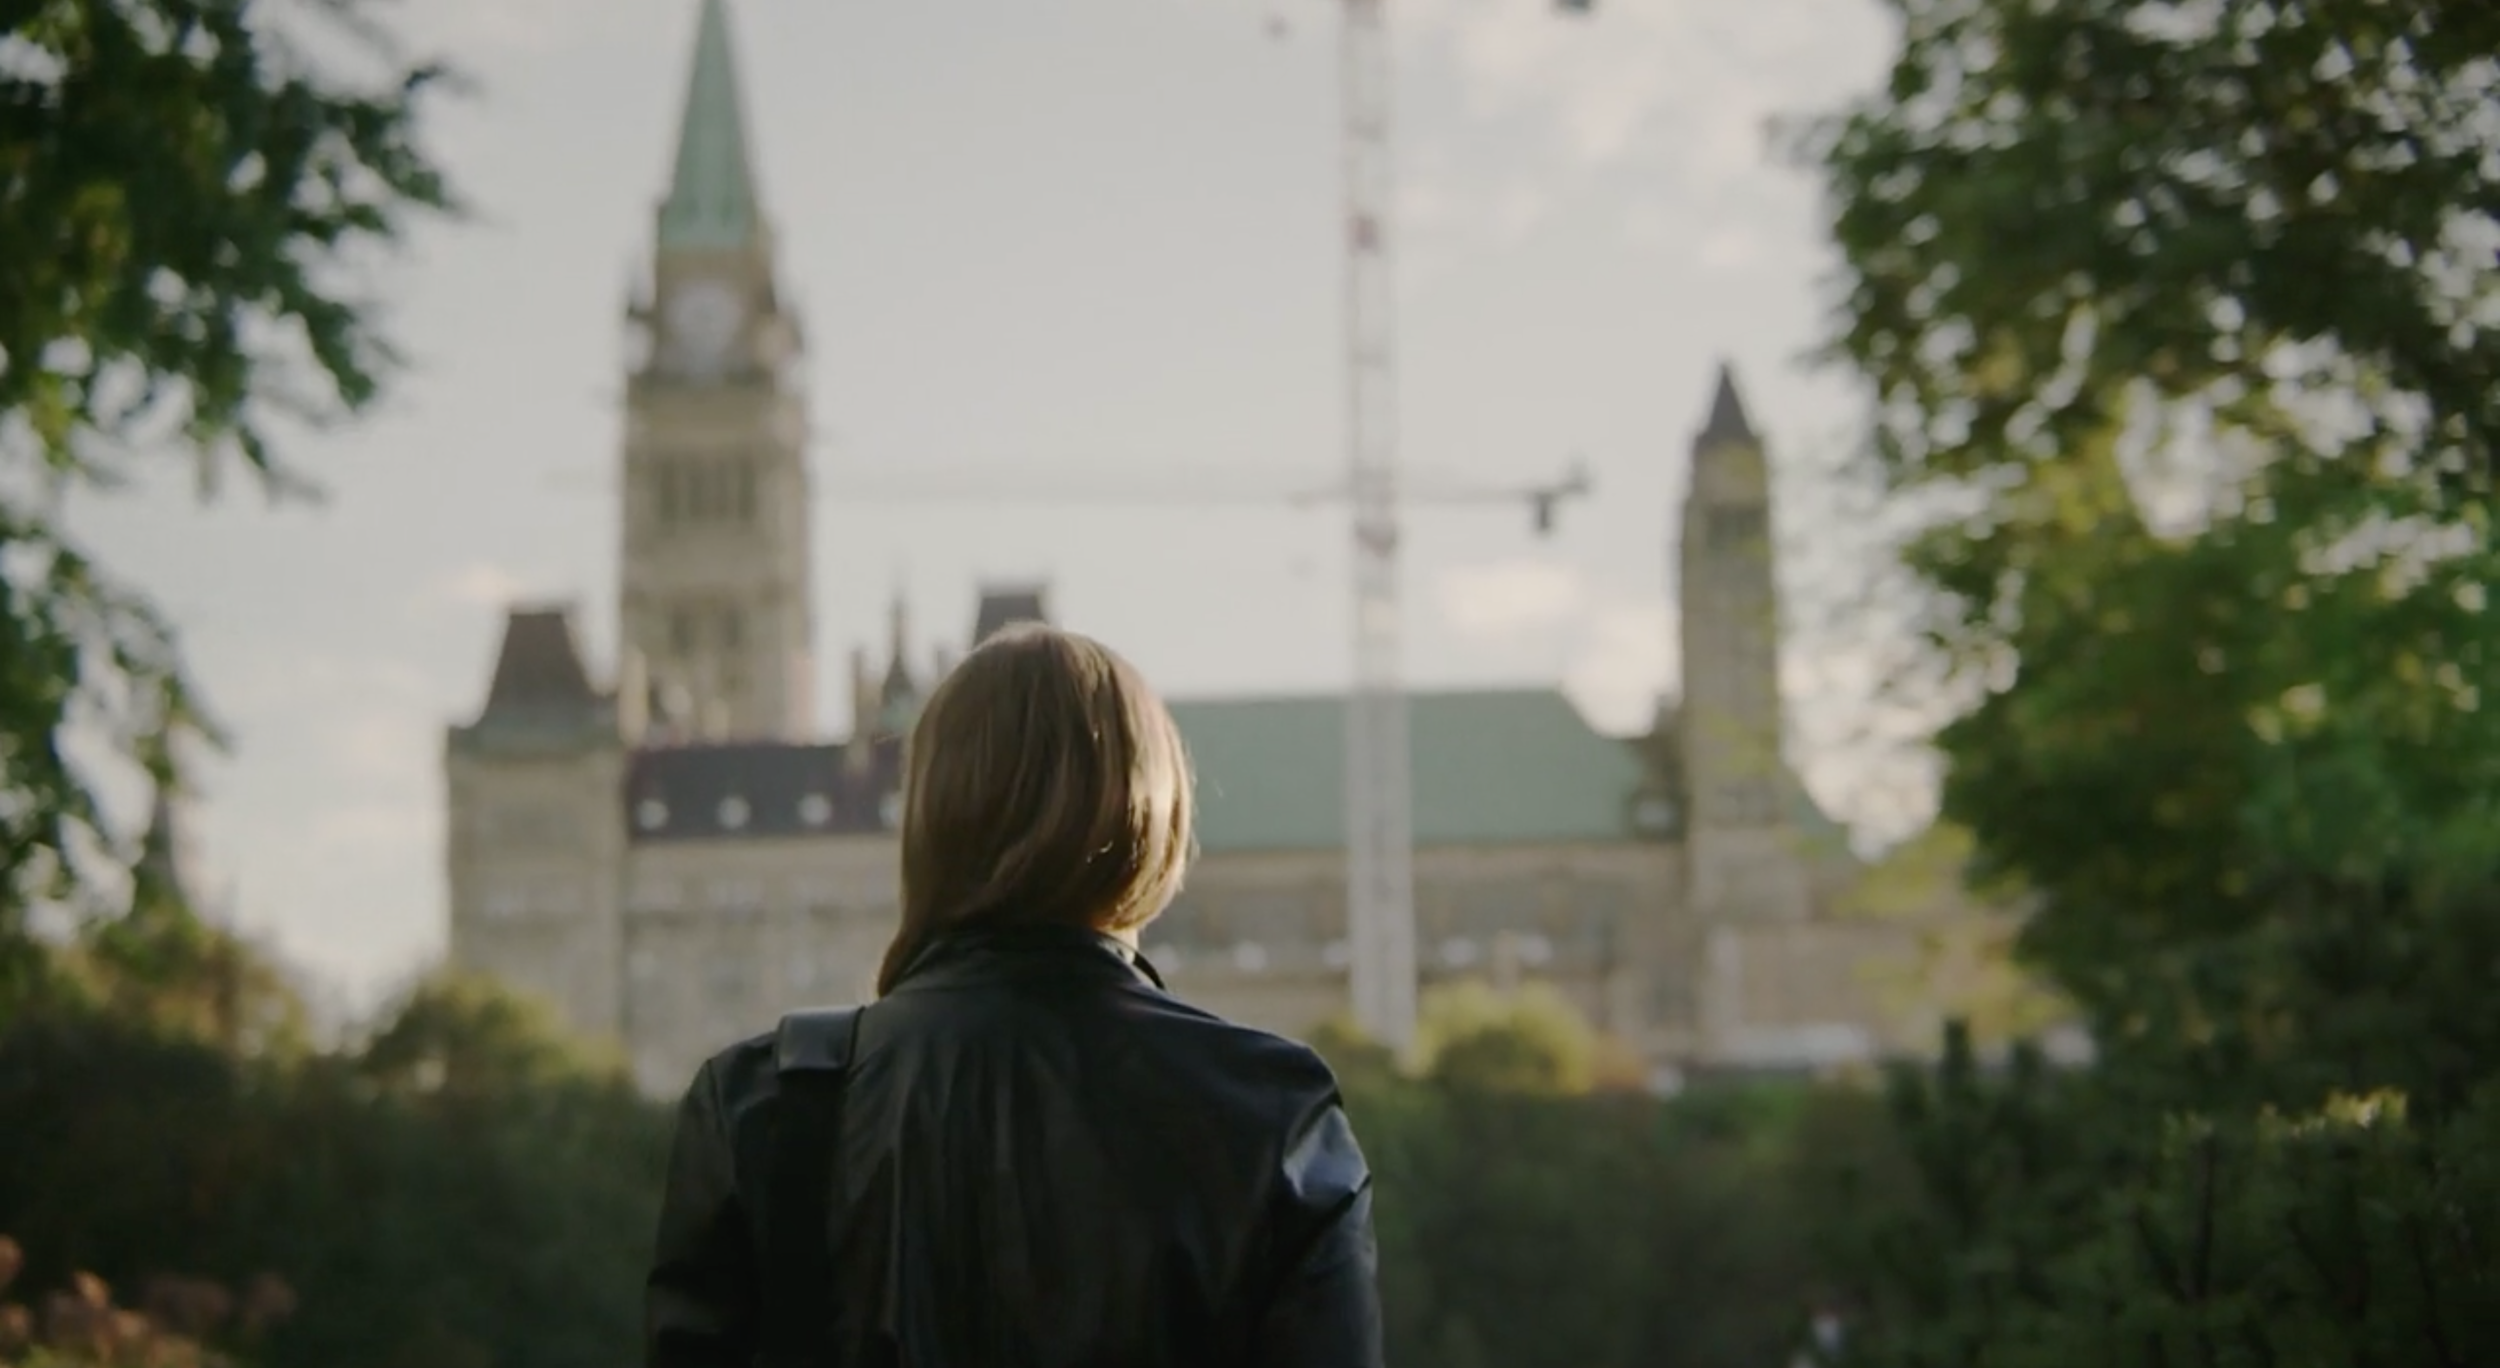 Woman Looks toward Canadian Parliament House in the summer, The Kiln video production